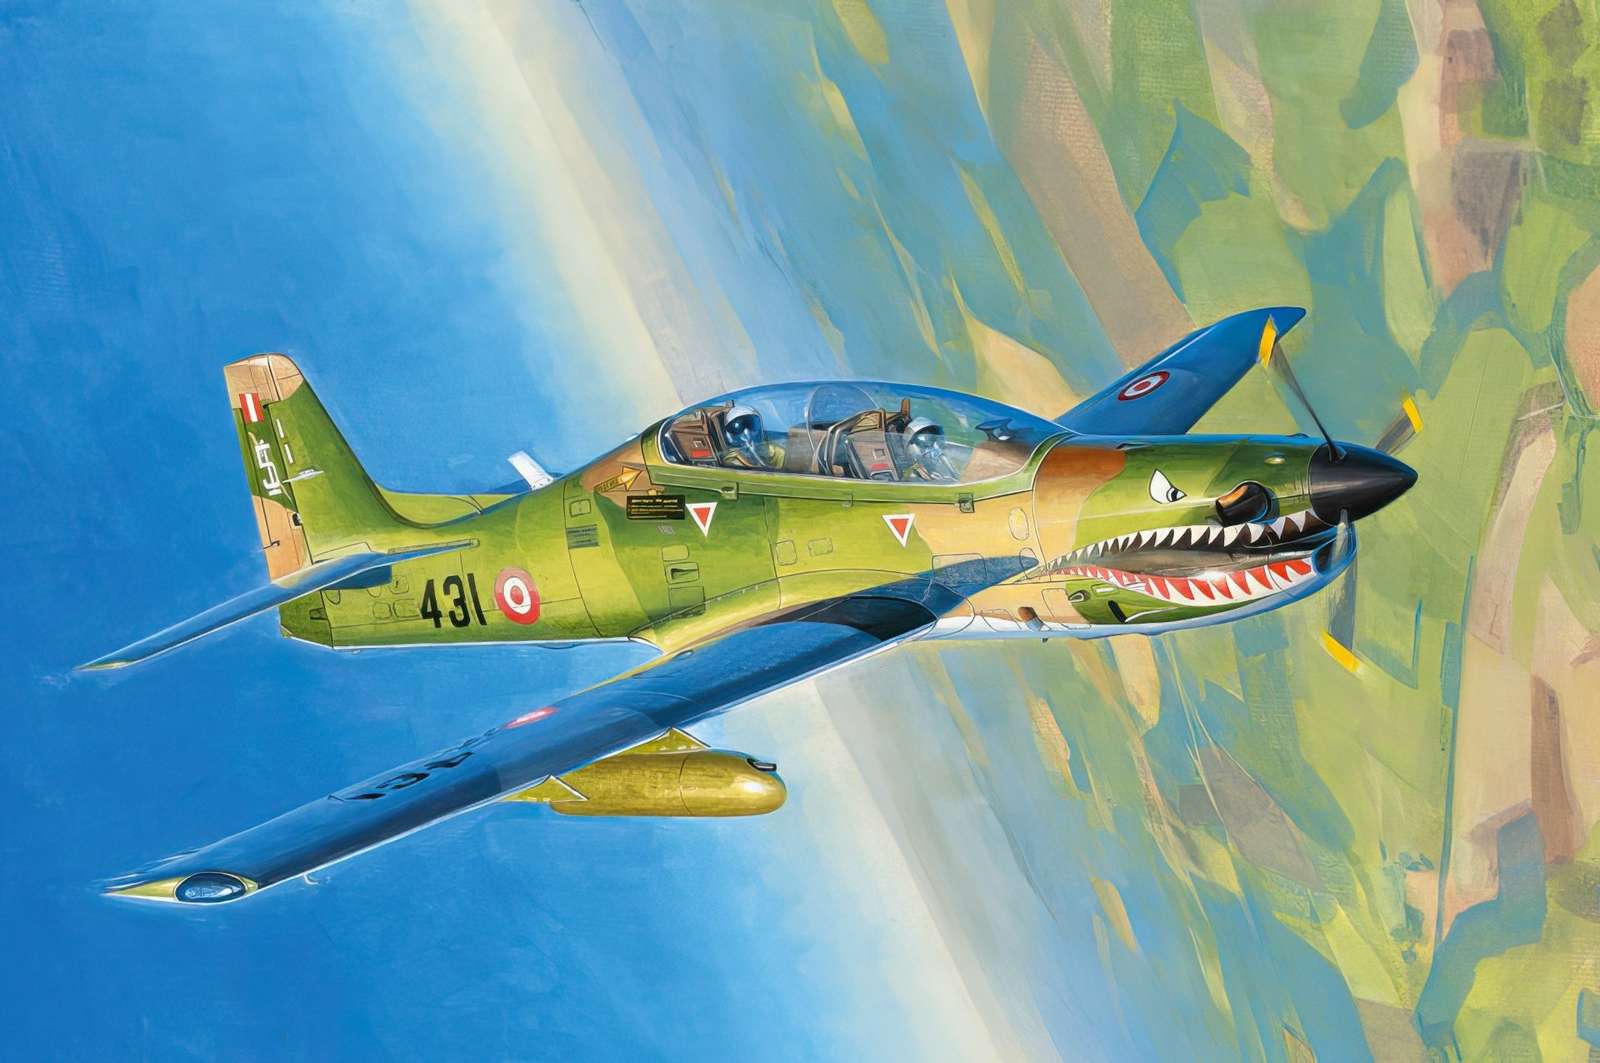 SUPER TUCANO MILITARY AIRPLANE - FAB jigsaw puzzle online